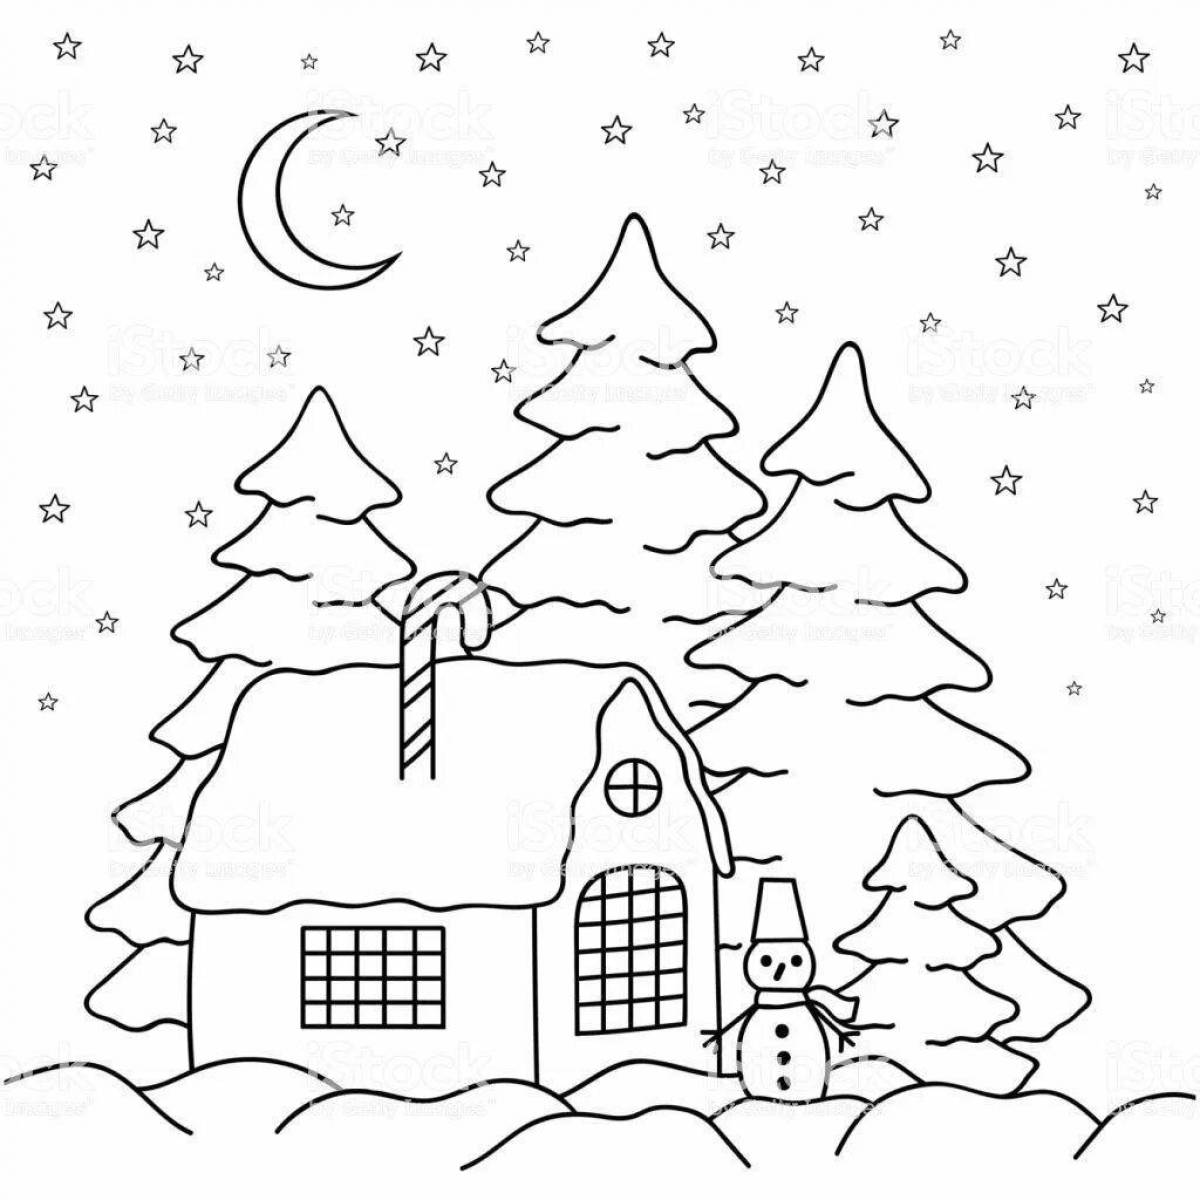 Great winter landscape coloring book for 10 year olds